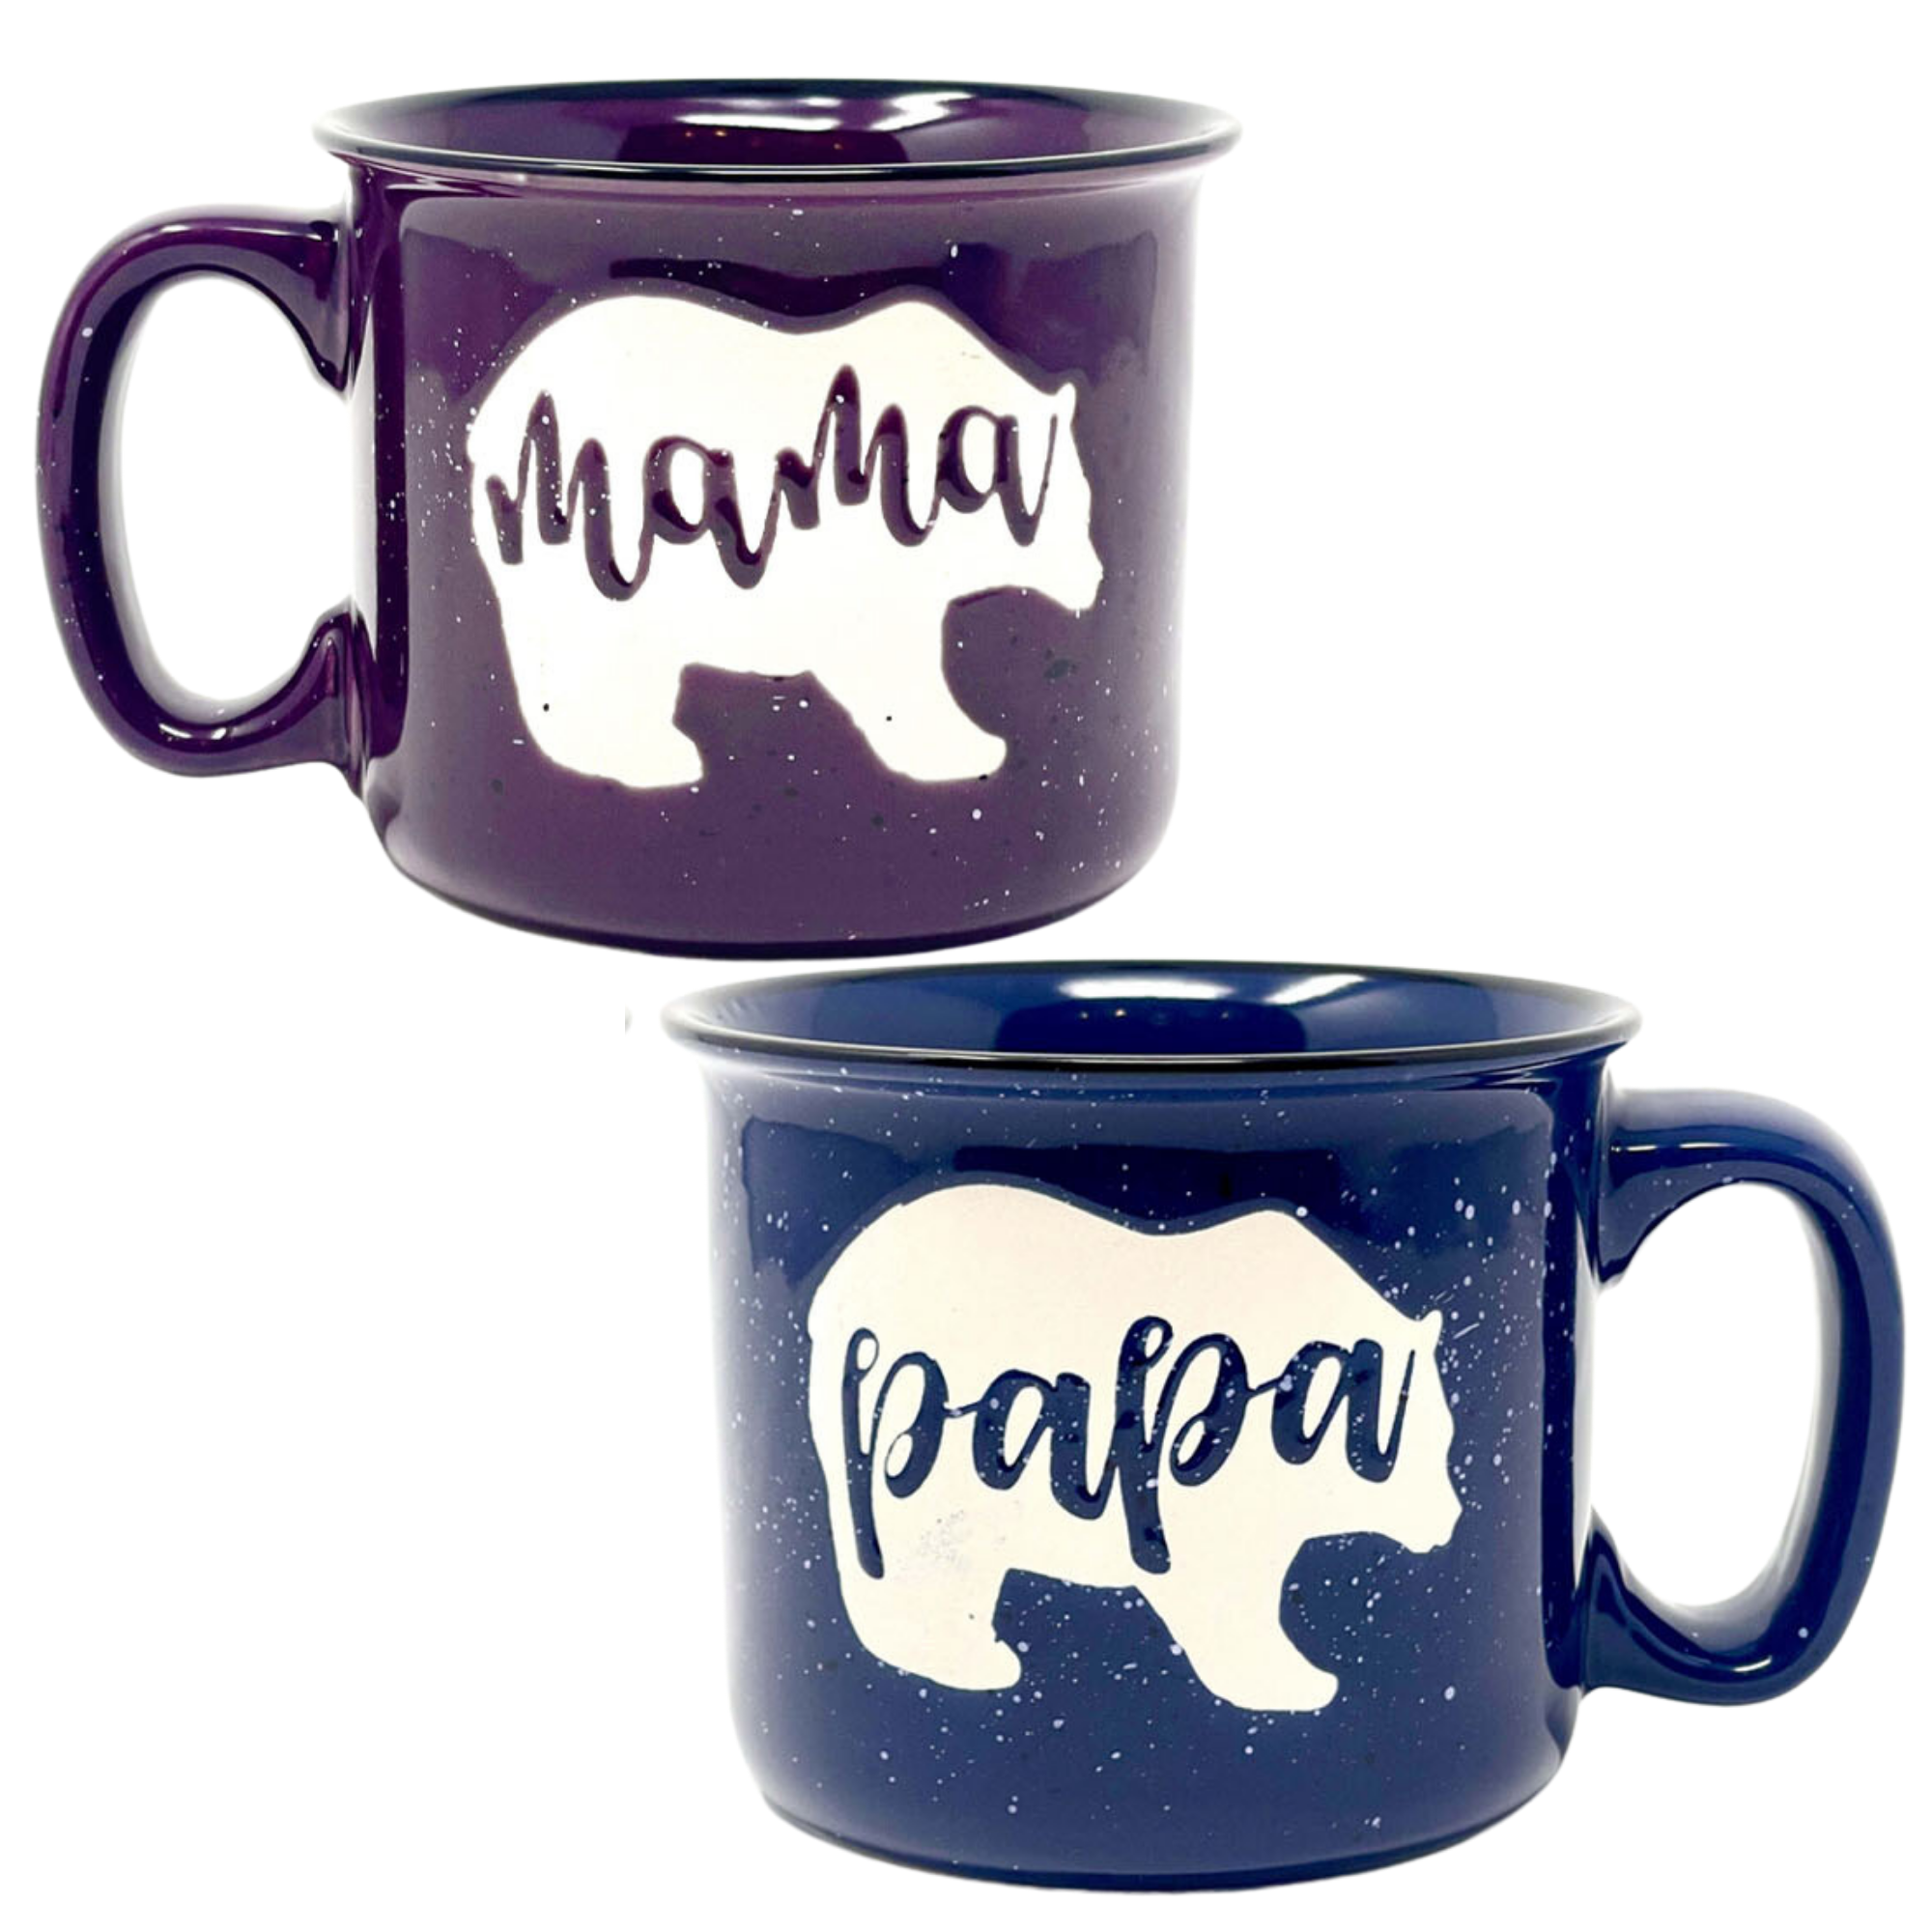 Fatbaby Mama Bear and Papa Bear Coffee Mugs,Father's Day Mother's Day Gifts for Mom and Dad,Christmas Gifts for Parents